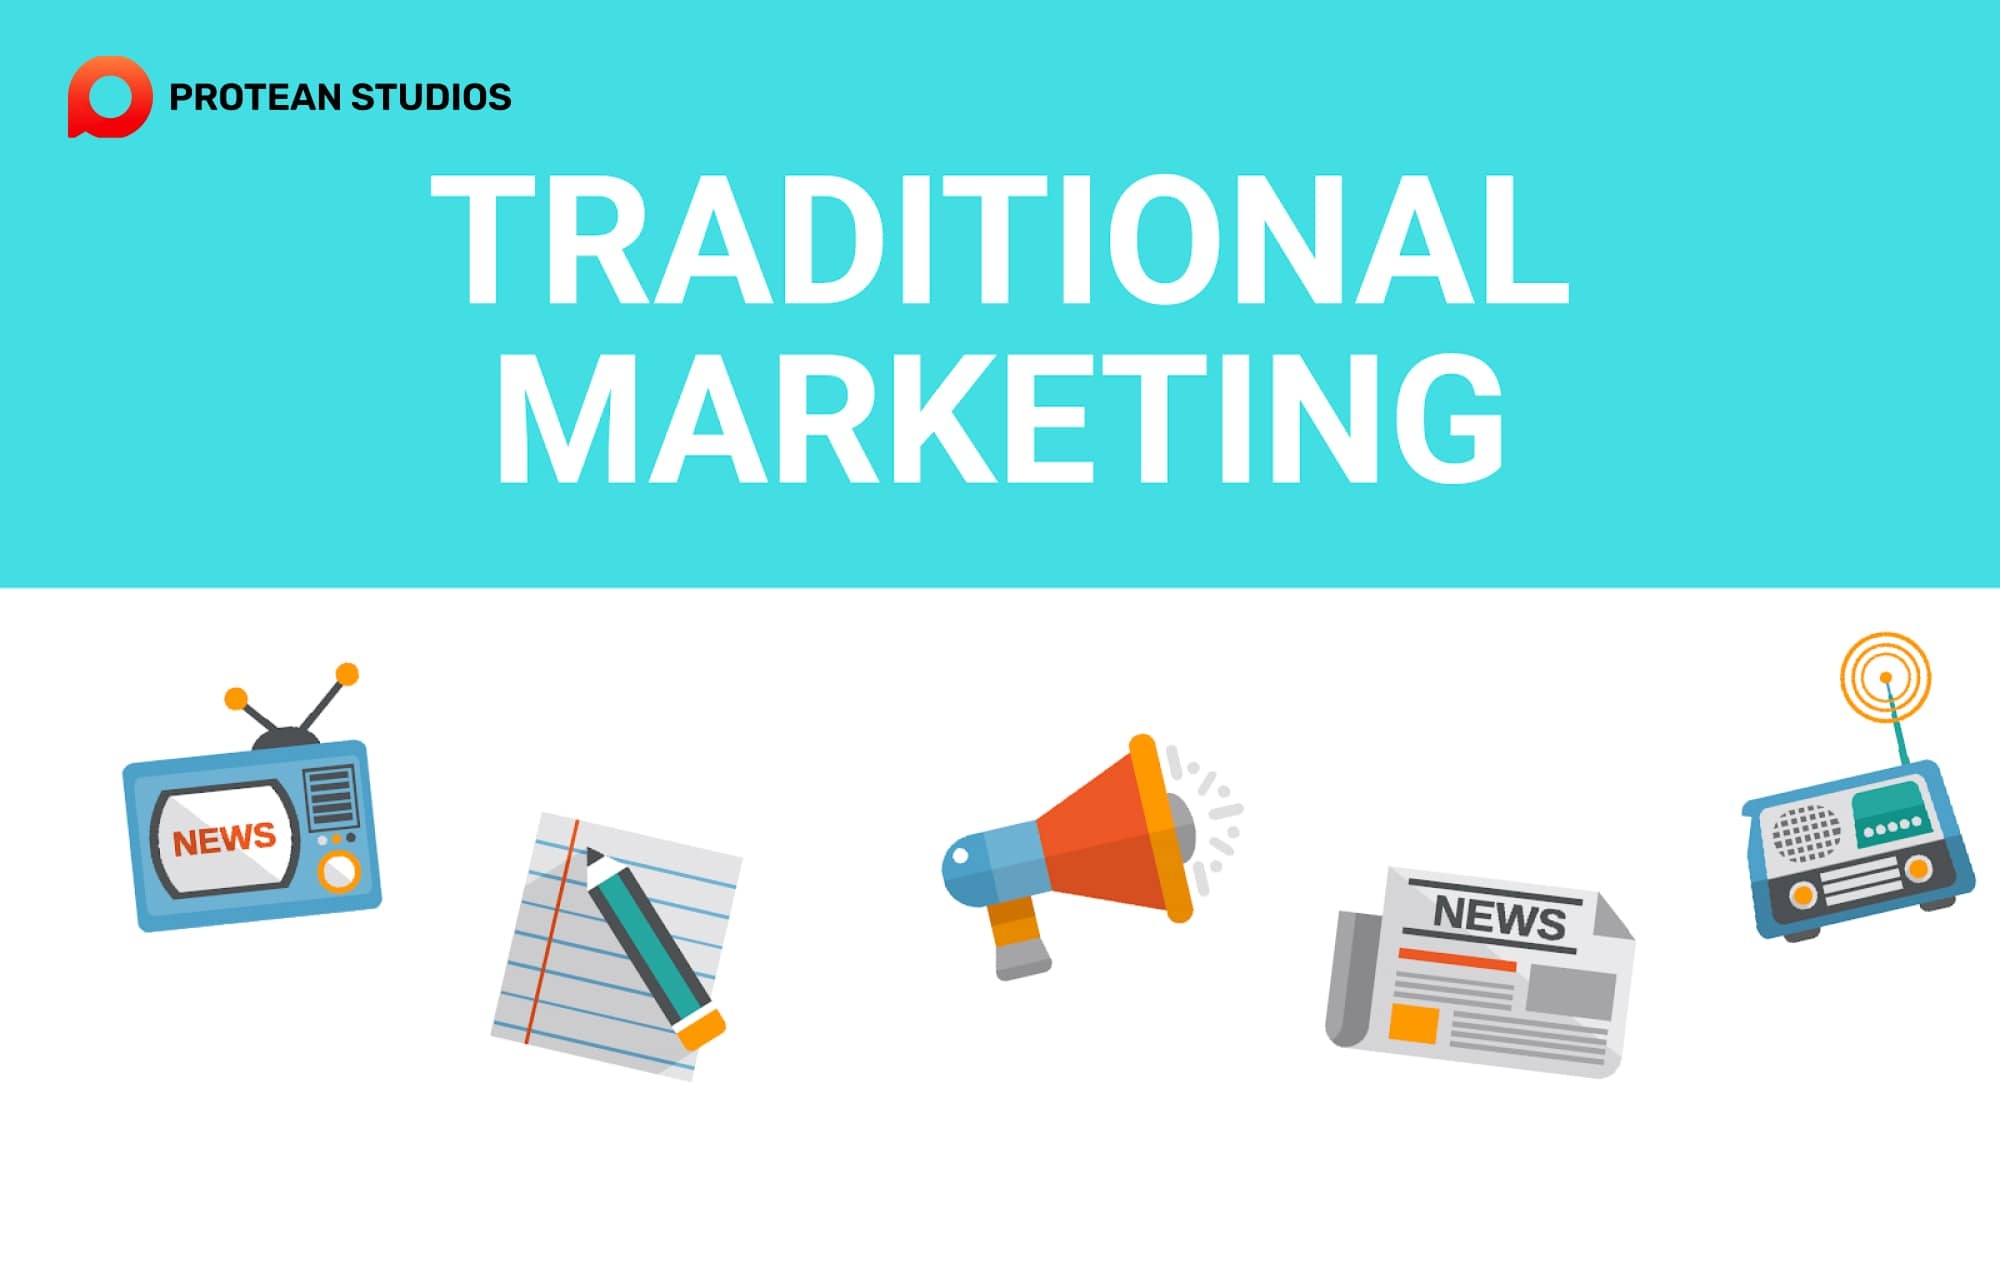 Traditional marketing and its features